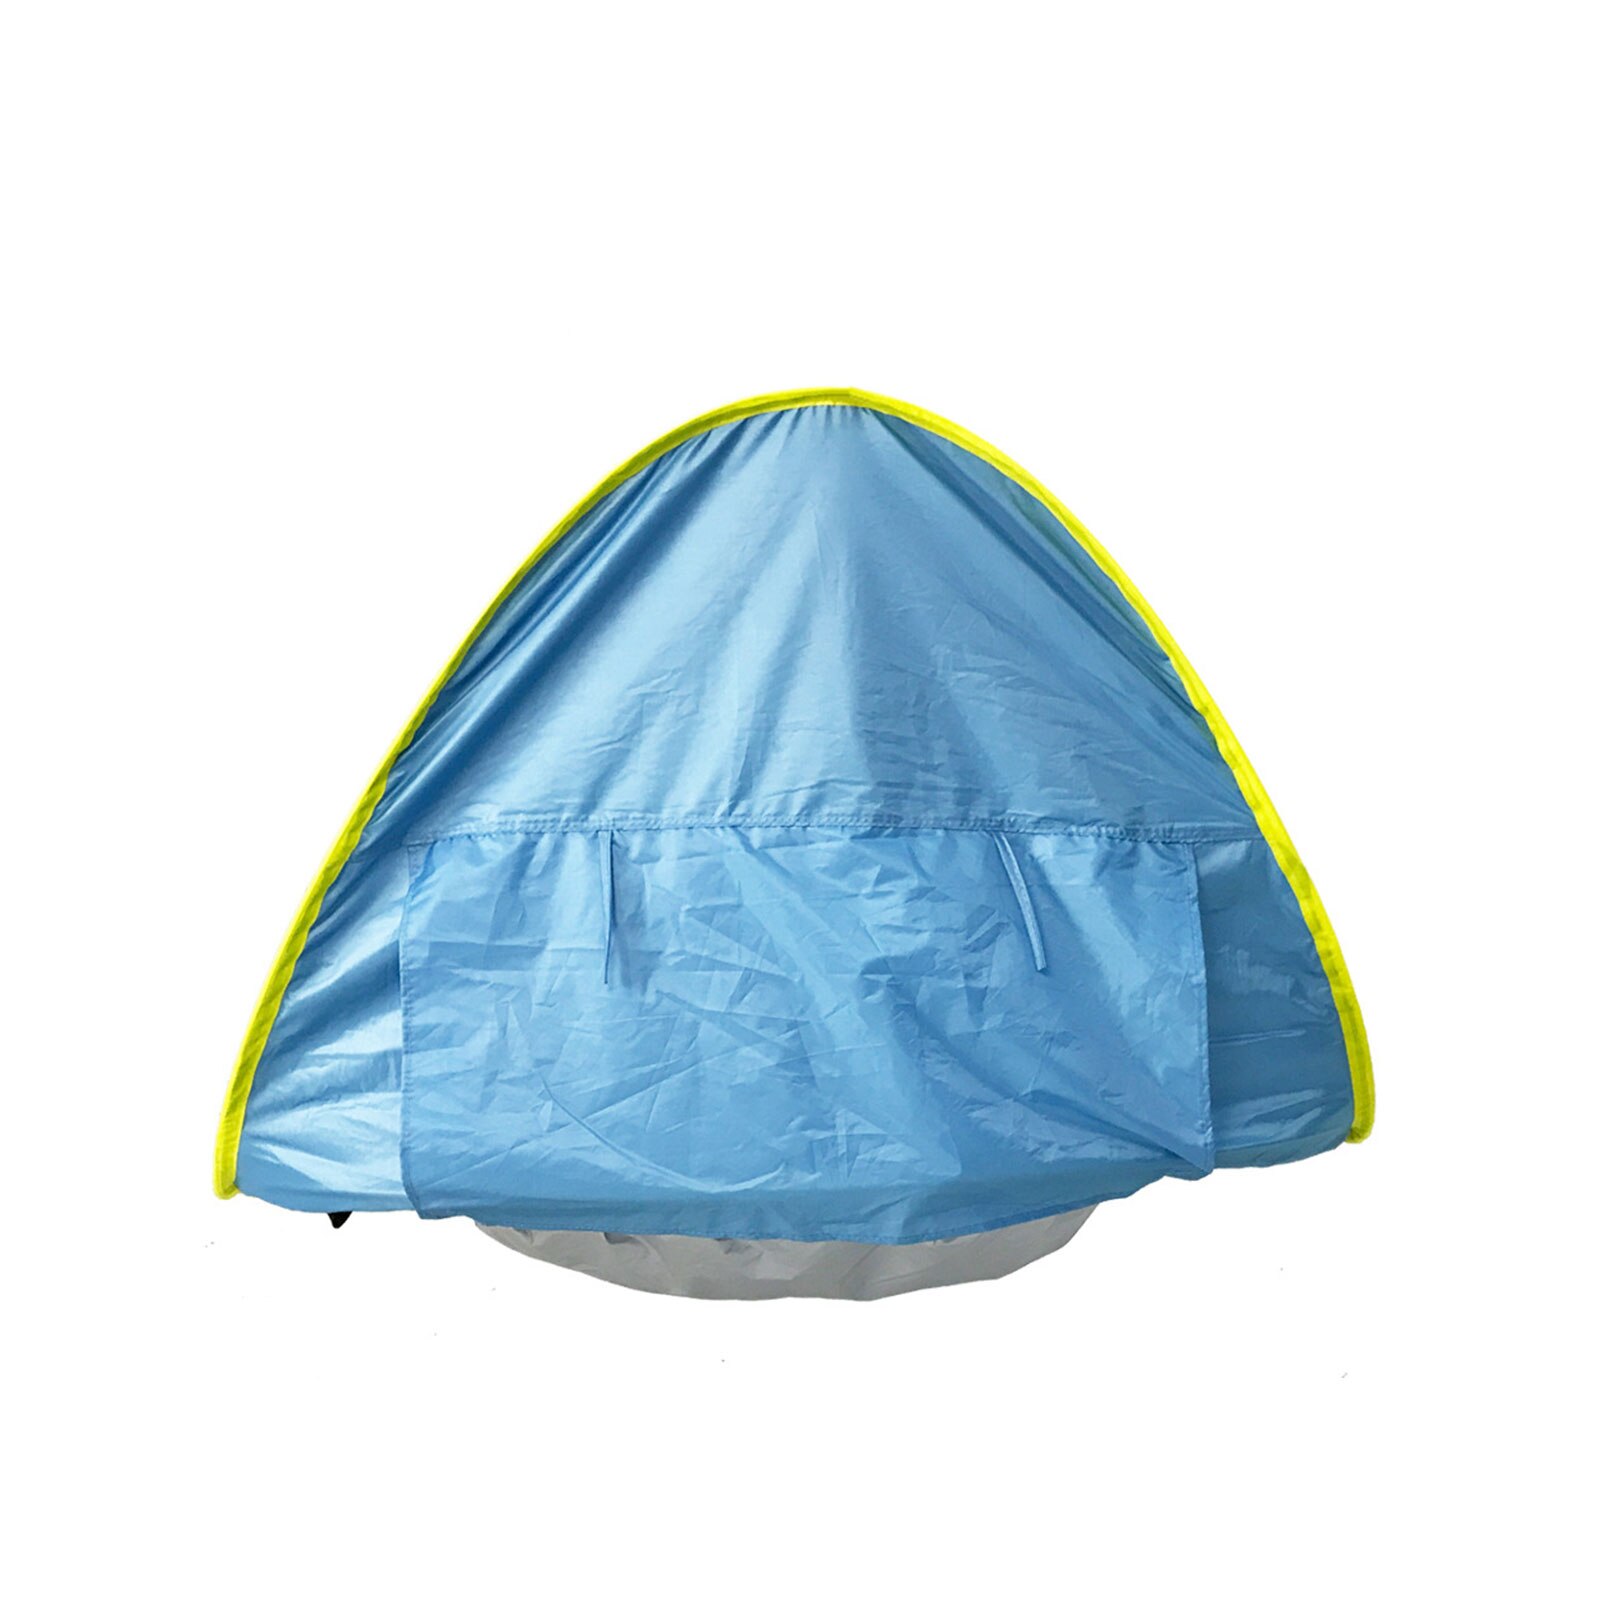 Cheap Goat Tents Waterproof Baby Beach Tent Pop Up Portable Shade Pool UV Protection Sun Shelter for Infant Kid Outdoor Camping Sunshade Beach   